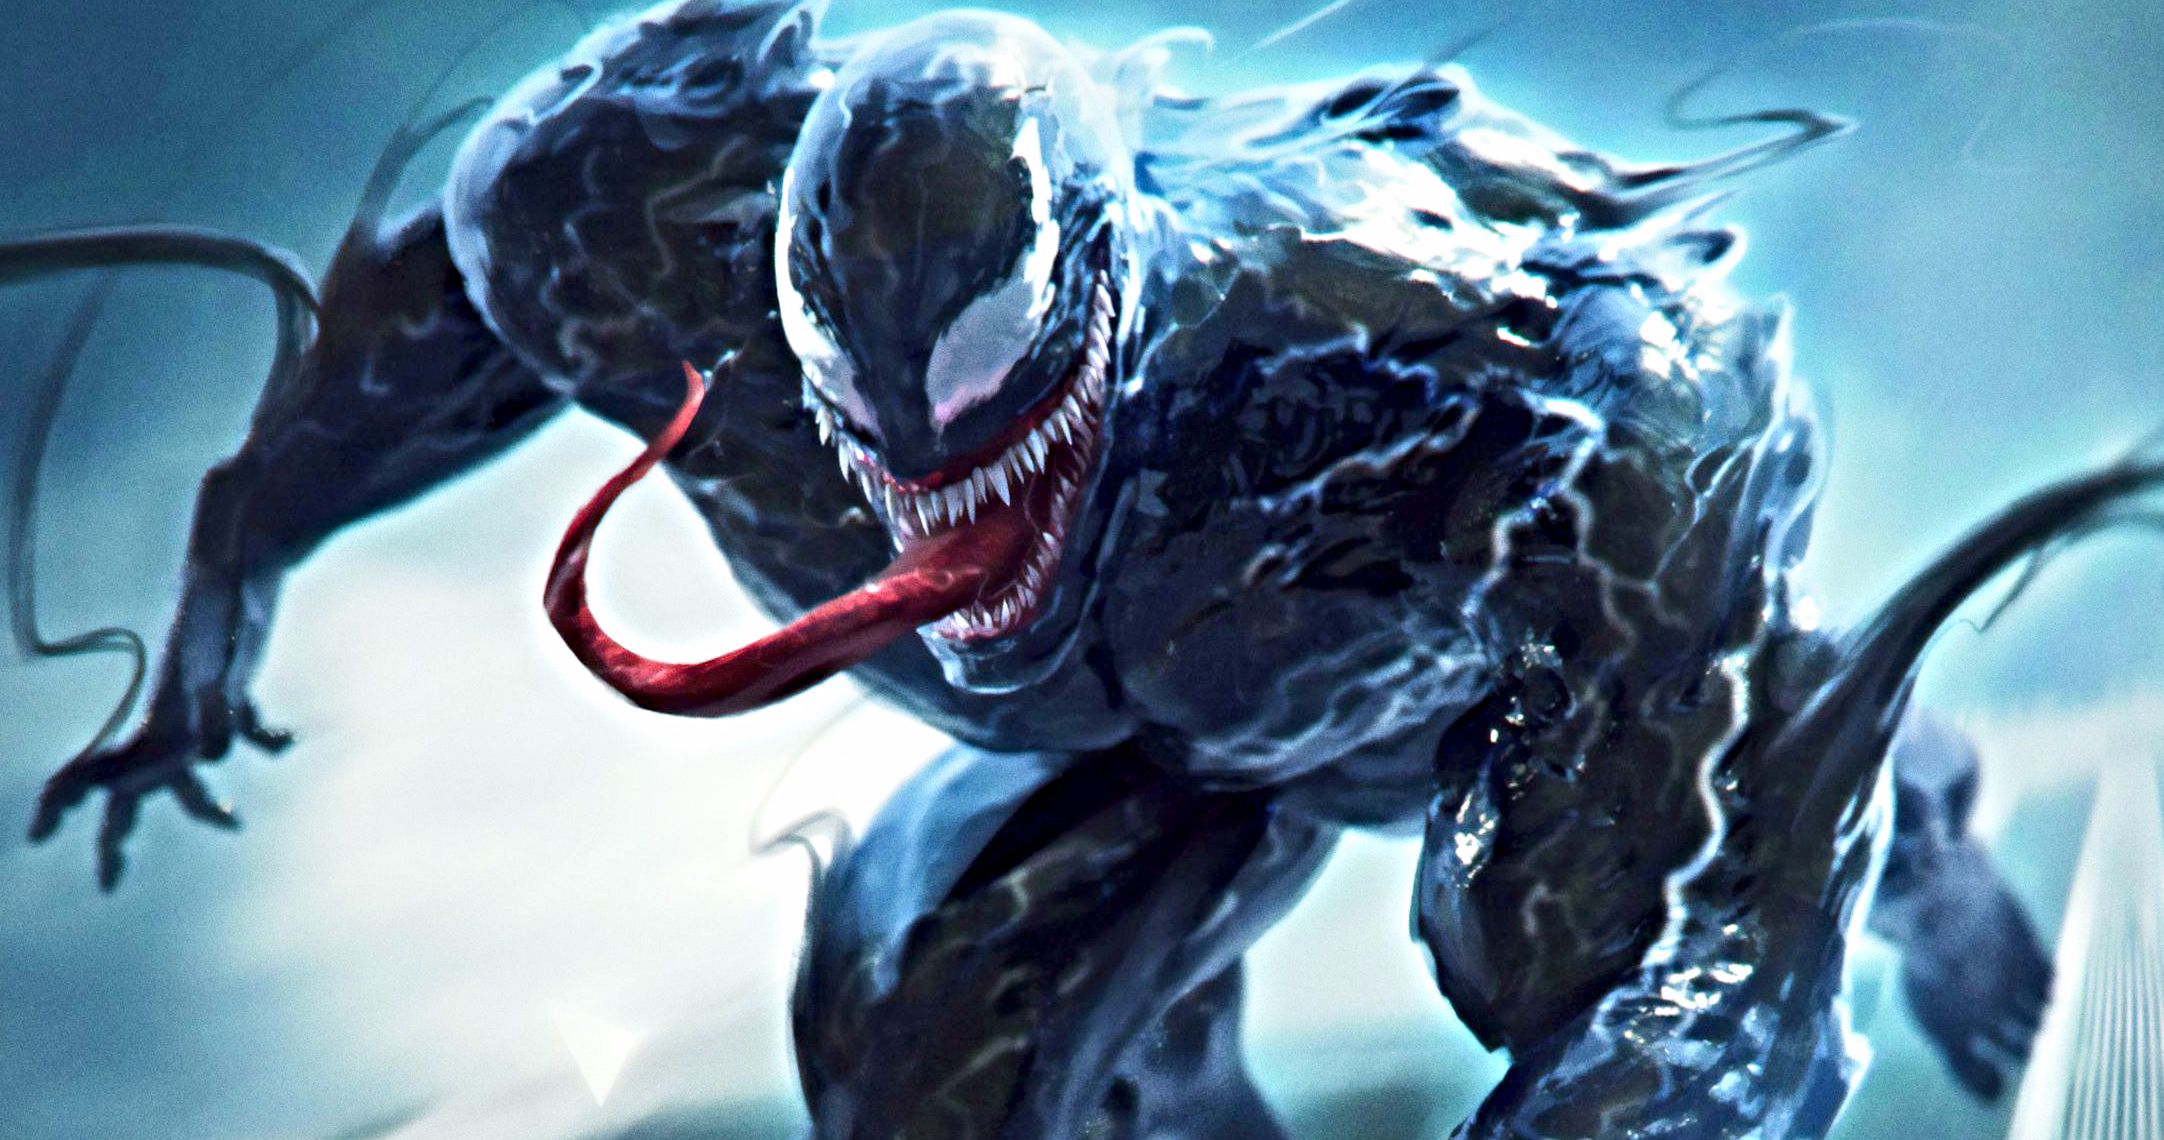 Venom 2 Is Still Coming to Movie Theaters in Fall 2020